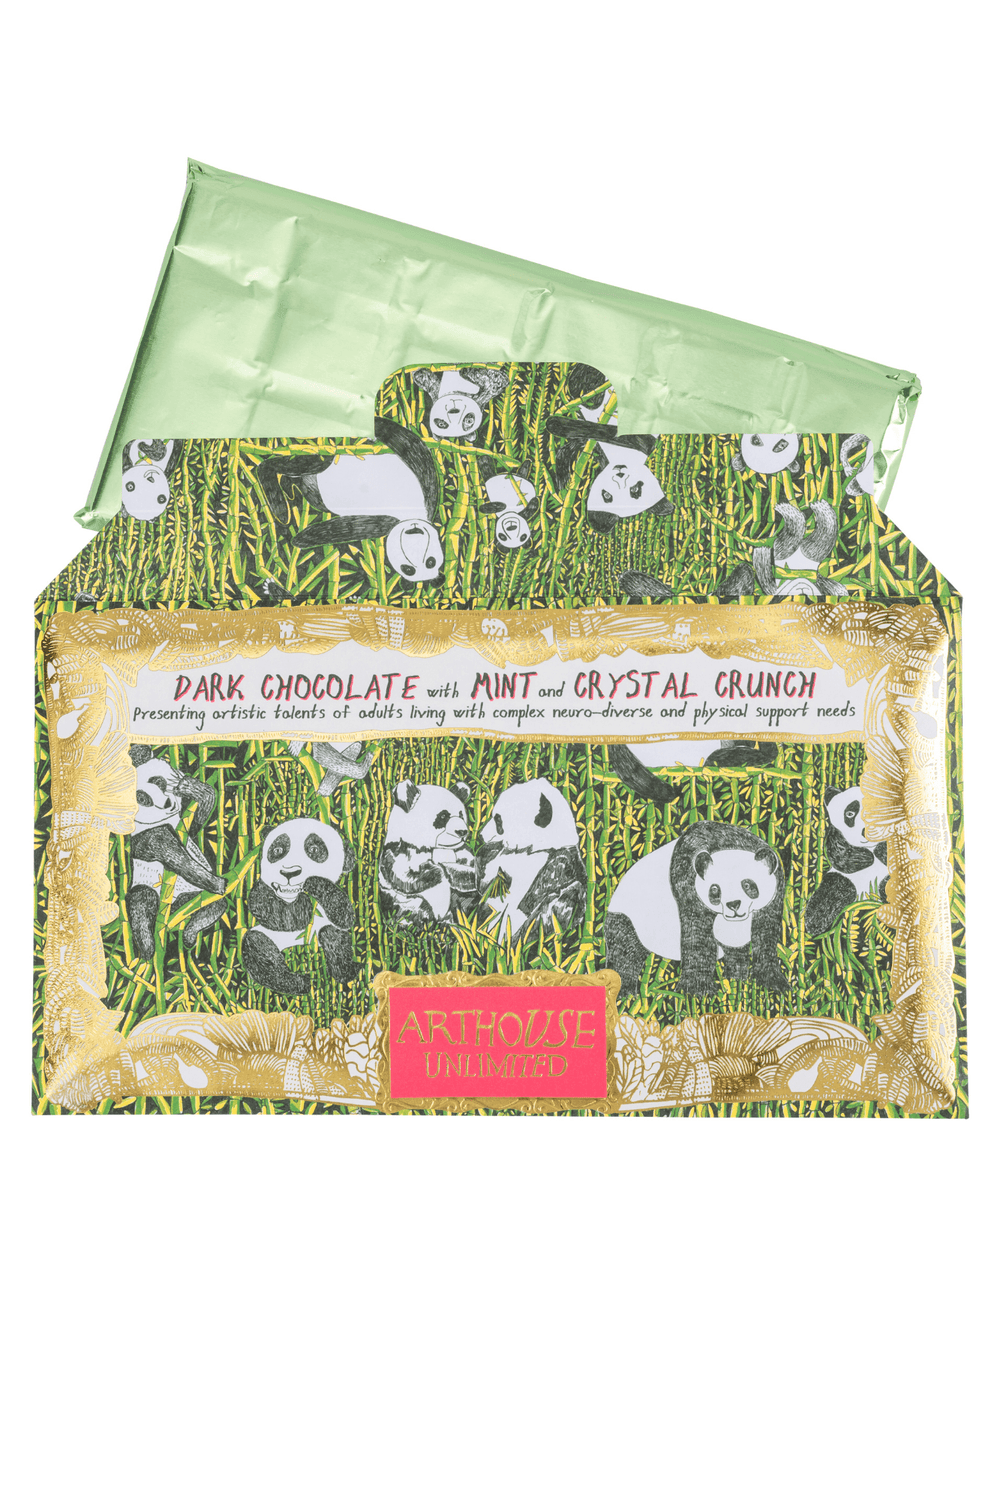 Art House Panda Party Dark Chocolate with Mint Crystals - One Hundred Stars